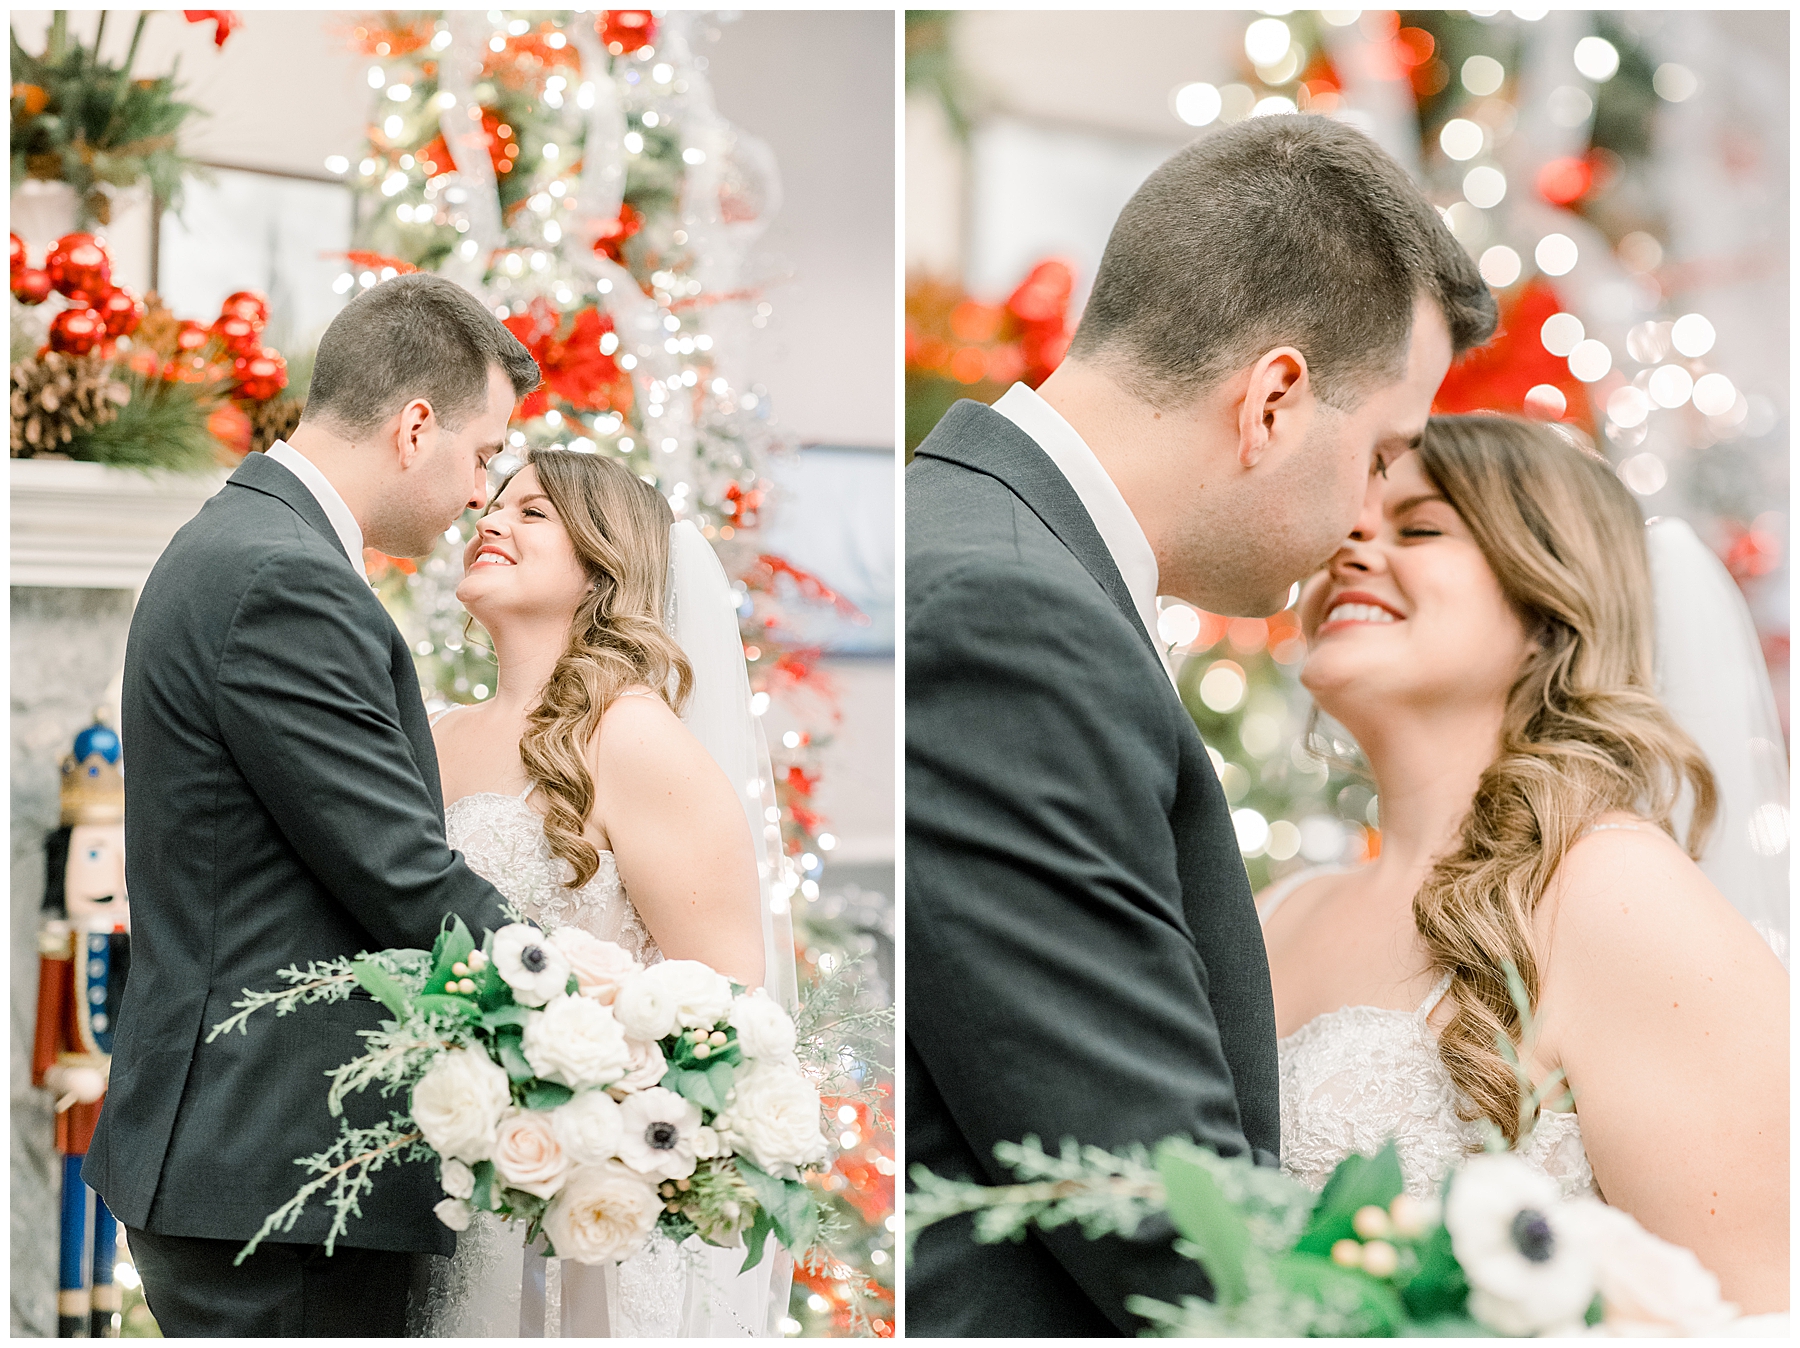 bride and groom share intimate moment before wedding ceremony